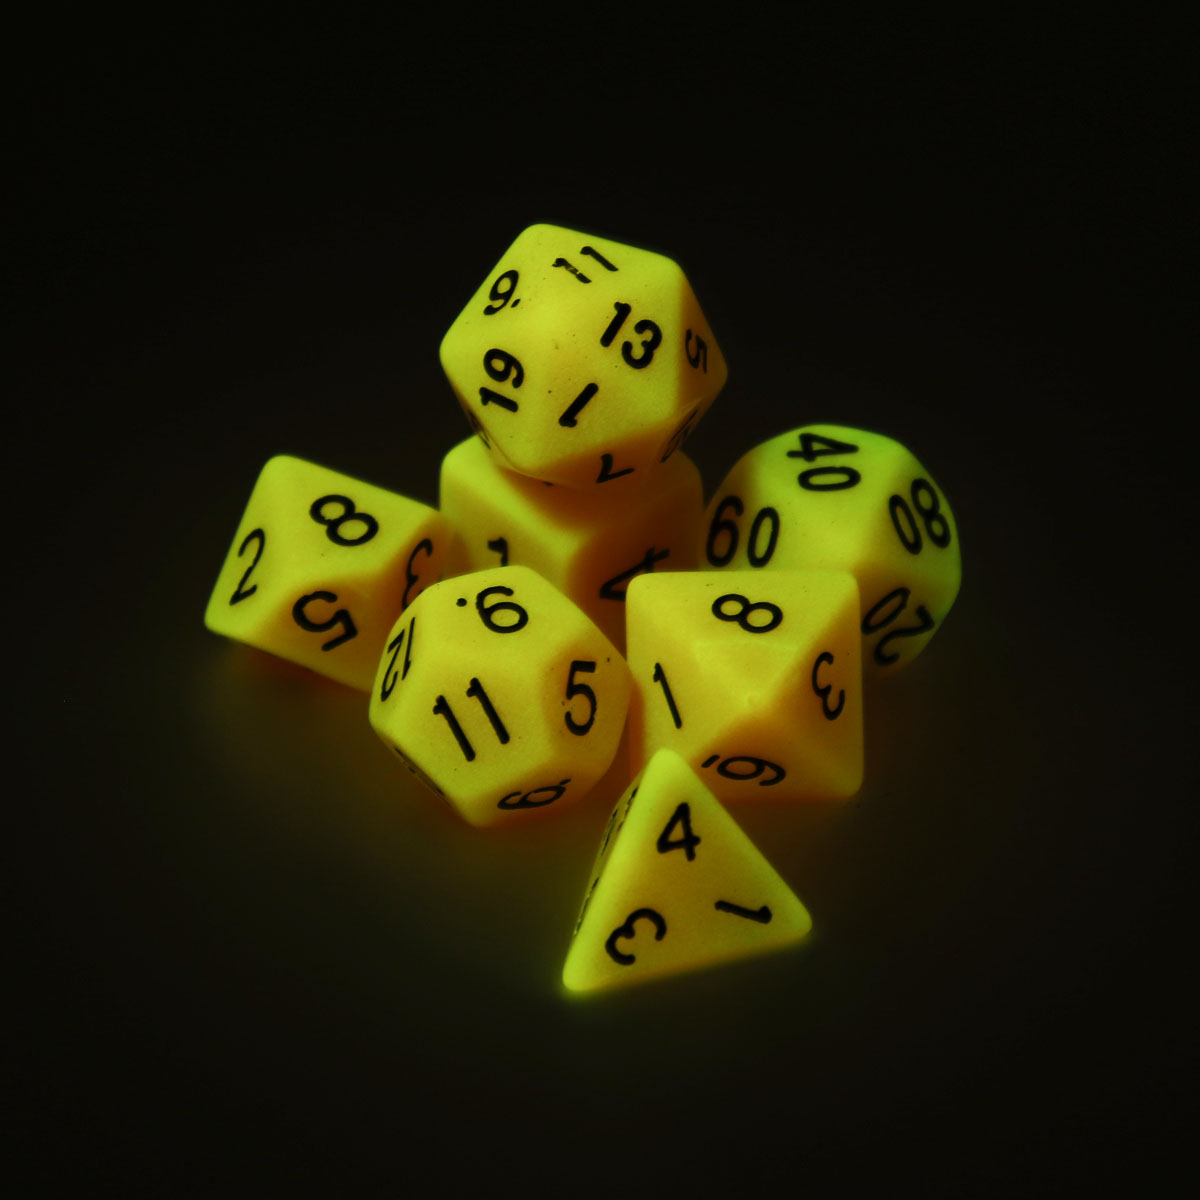 7-Pcs-Luminous-Polyhedral-Dices-Multi-sided-Dice-Set-Polyhedral-Dices-With-Dice-Cup-RPG-Gadget-1422236-9